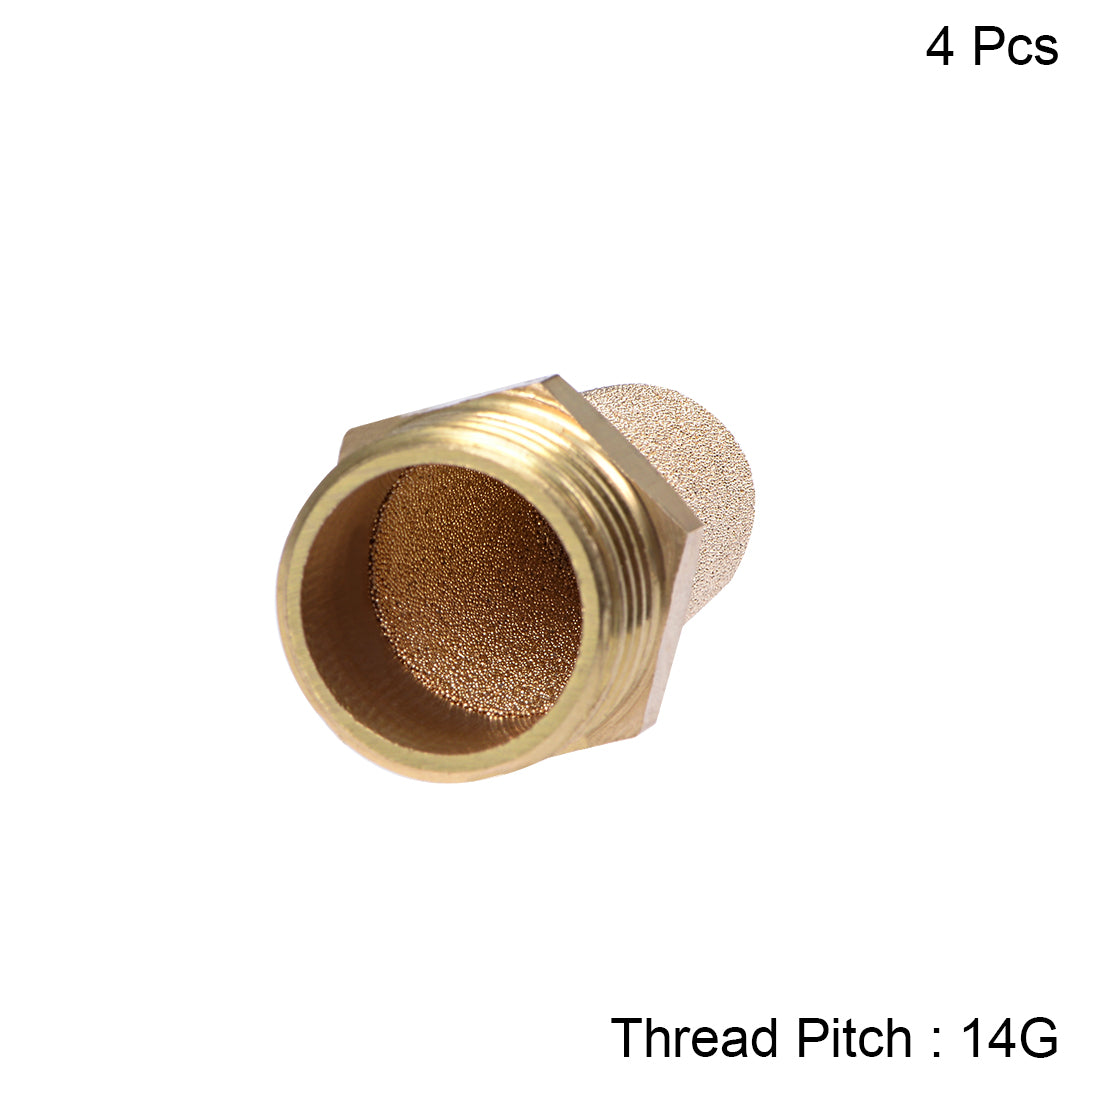 uxcell Uxcell 1/2 PT Sintered Bronze Exhaust Muffler with Brass Body Protruding 4pcs